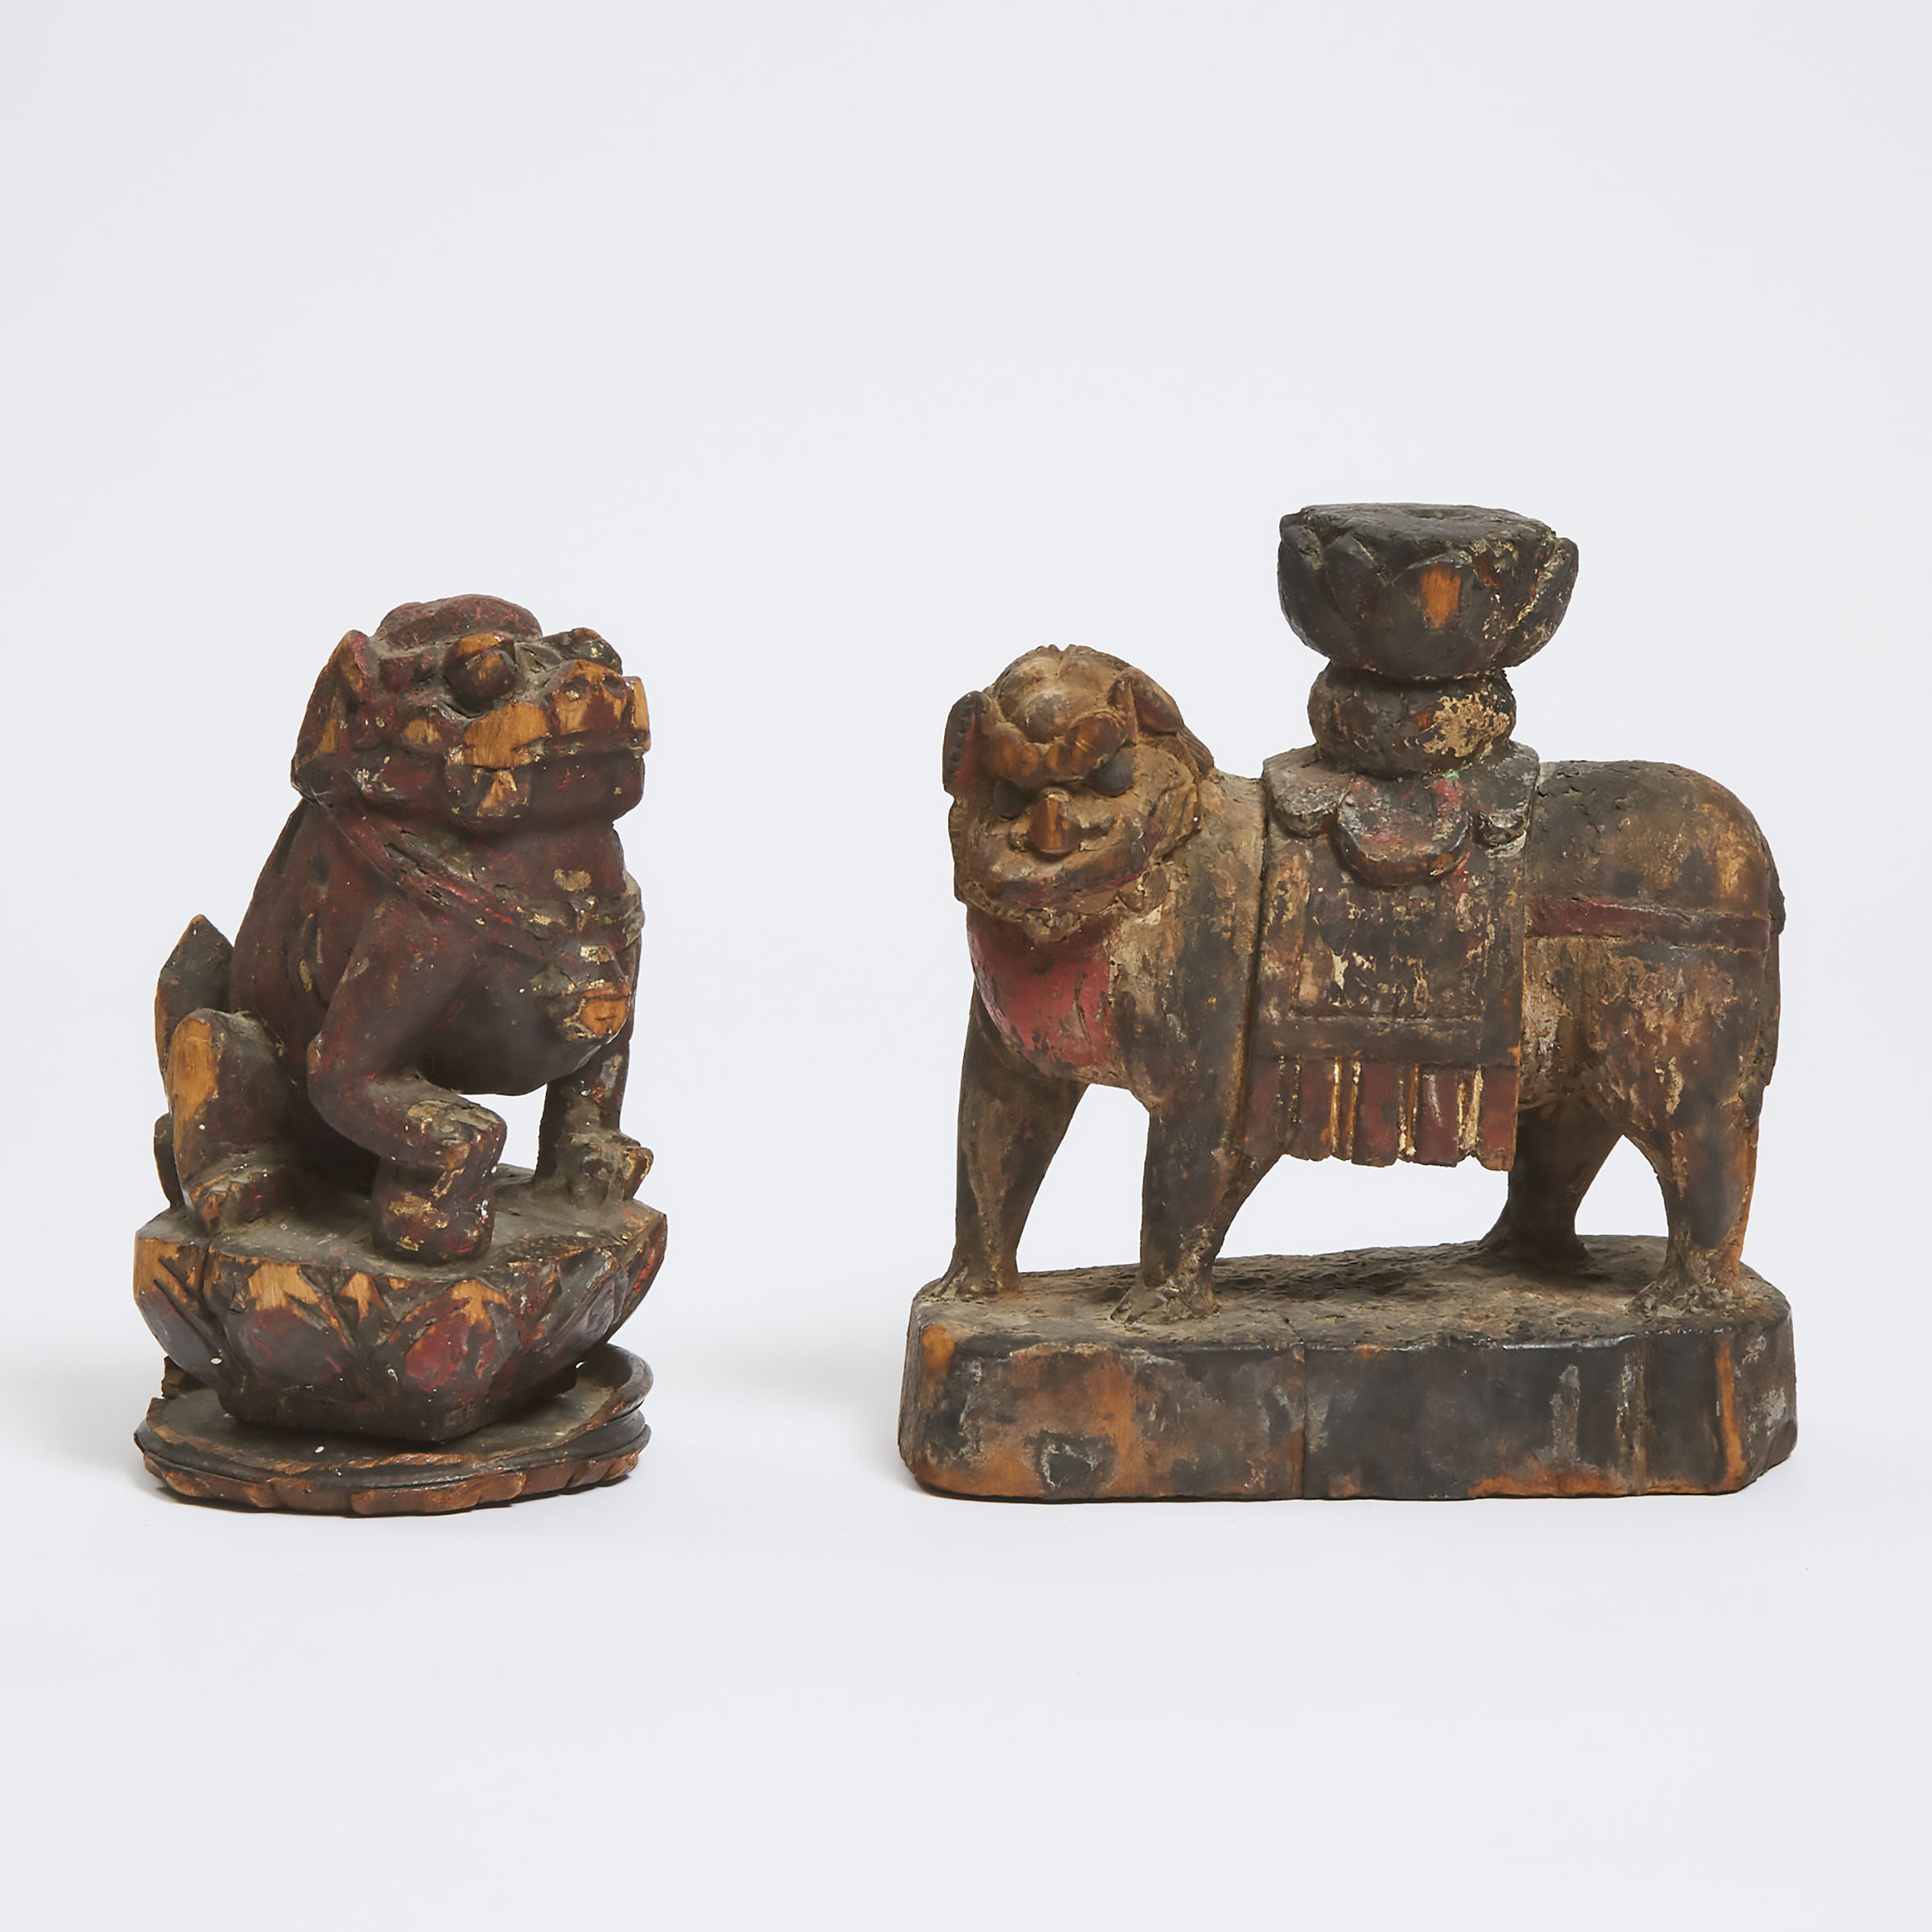 Two Gilt Wood Figures of Lions, Possibly